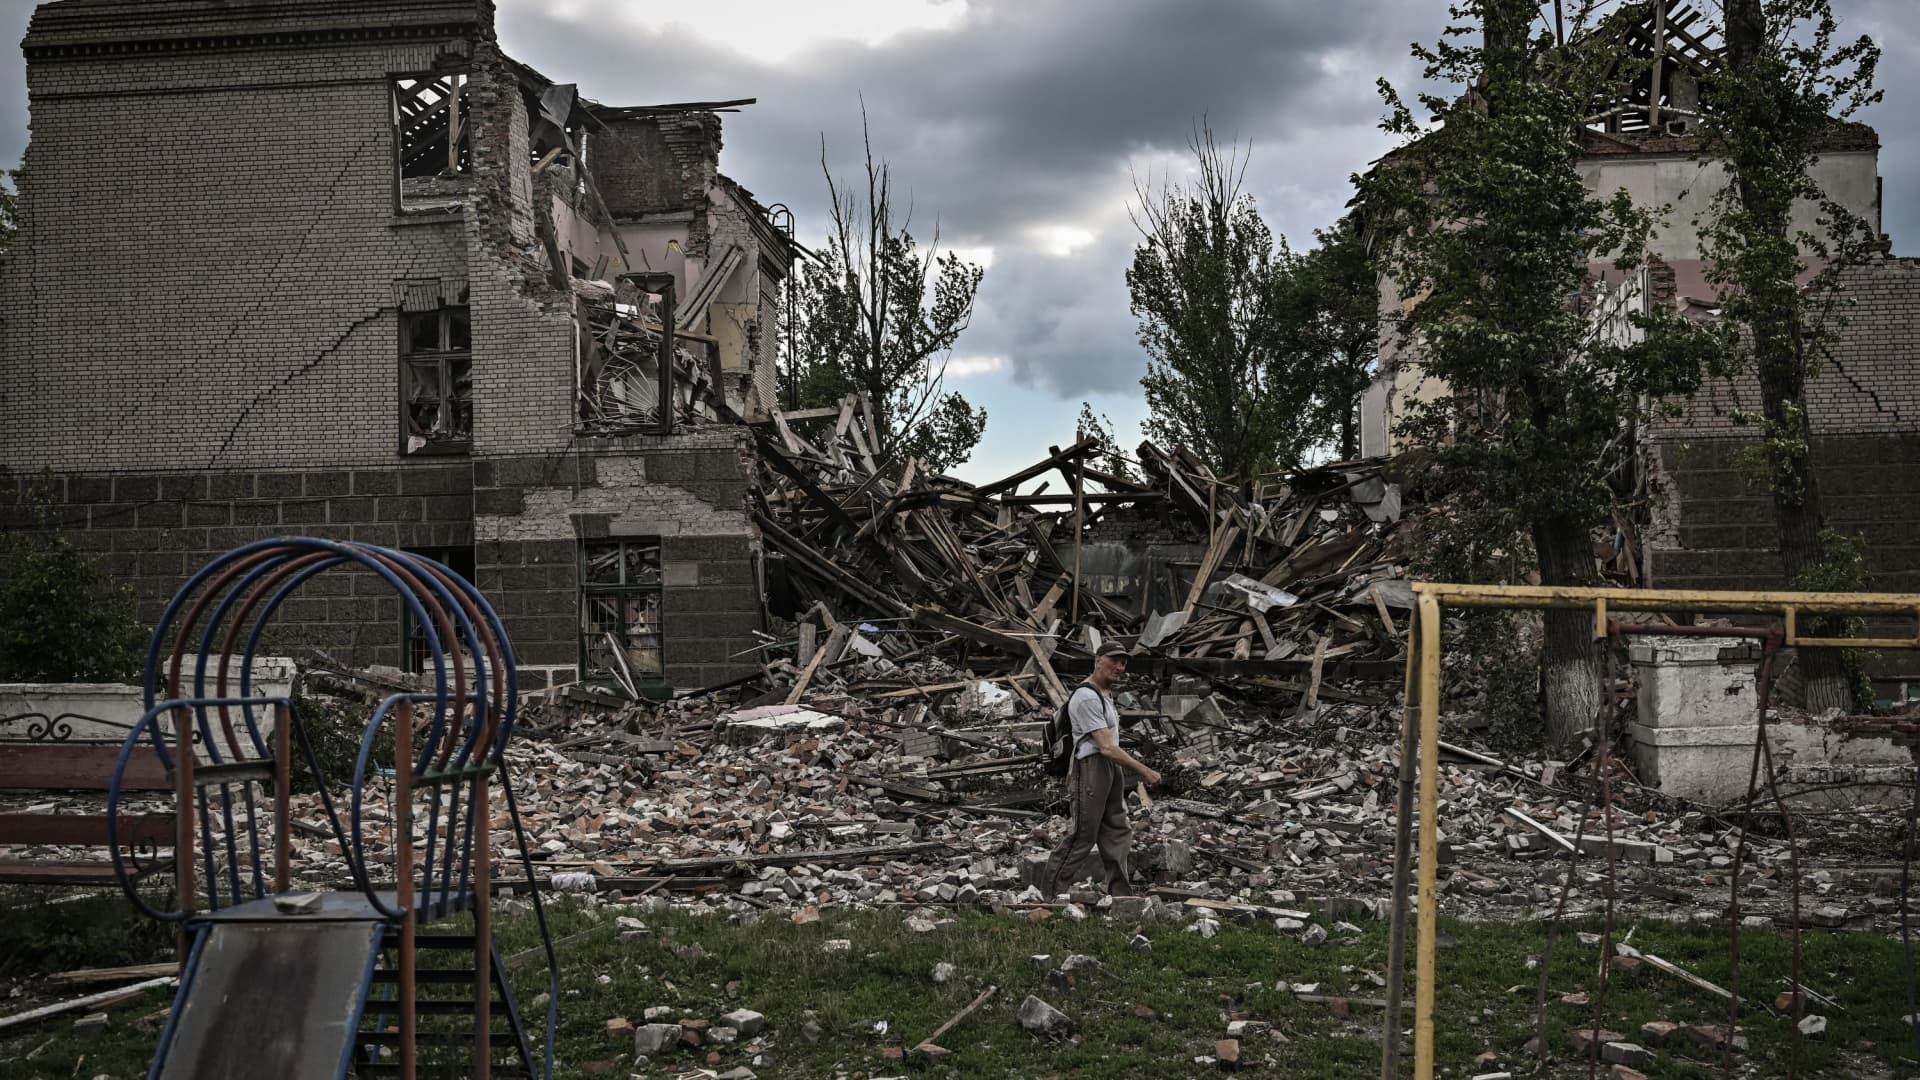 A man walks in front of a destroyed school in the city of Bakhmut, in the eastern Ukrainian region of Donbas, on May 28, 2022.